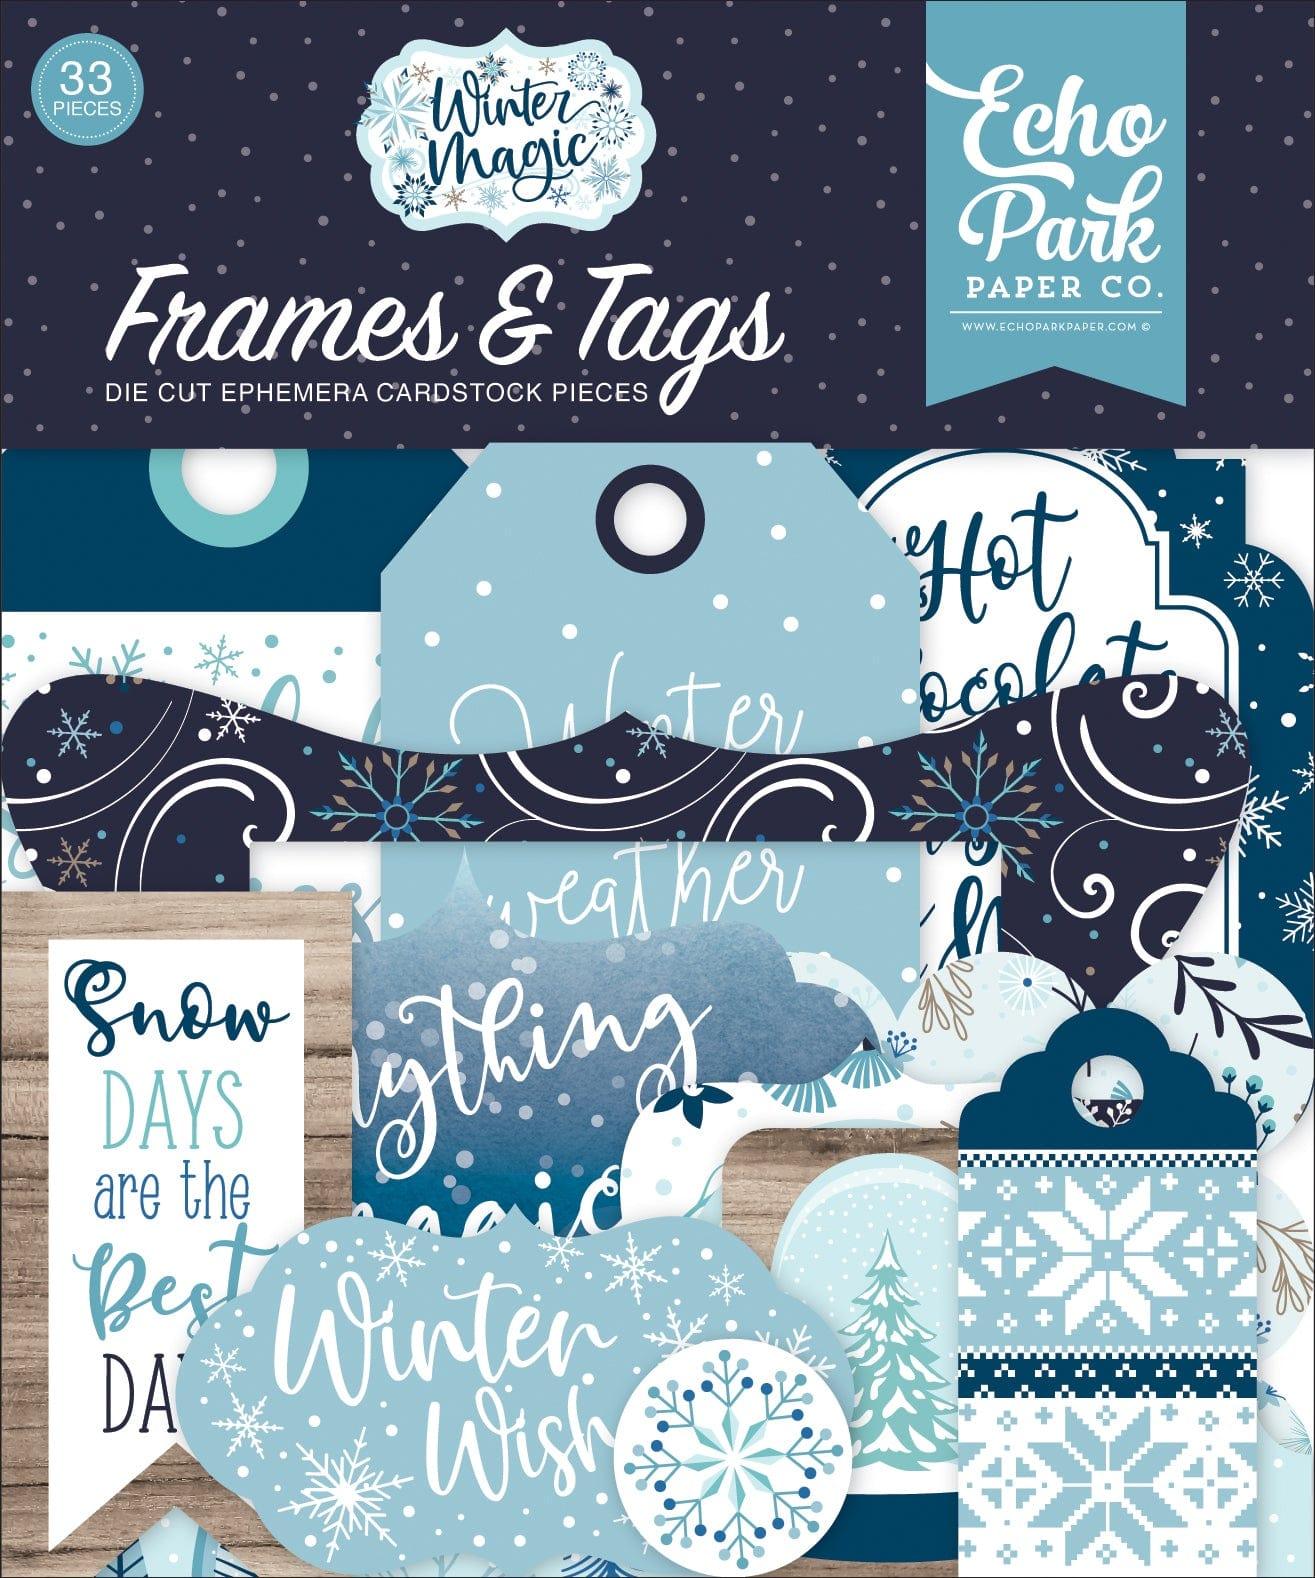 Winter Magic Collection 5 x 5 Frames & Tags Die Cut Scrapbook Embellishments by Echo Park Paper - Scrapbook Supply Companies